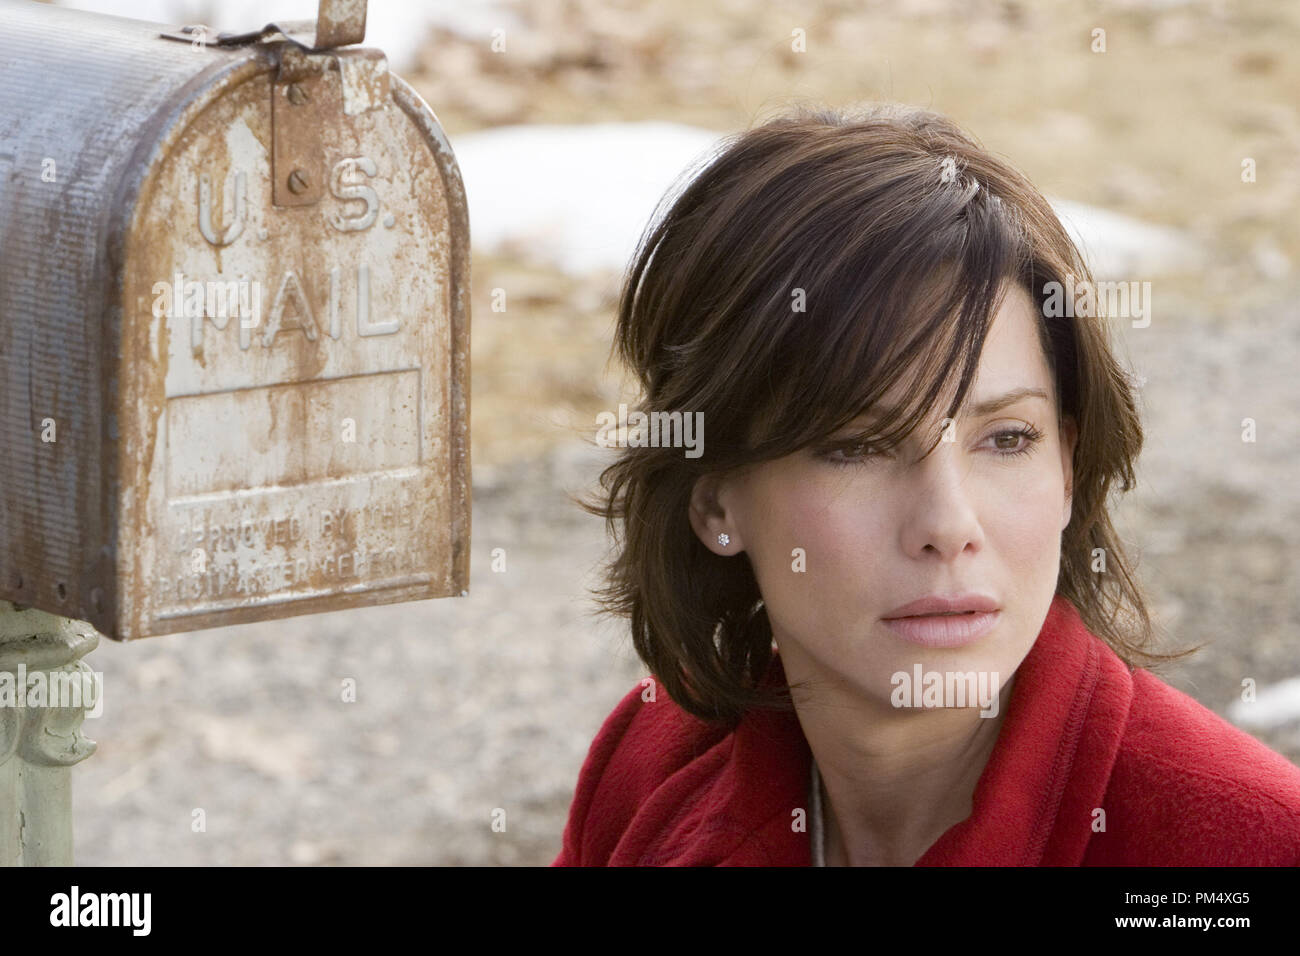 Studio Publicity Still from 'The Lake House' Sandra Bullock © 2006 Warner Photo credit: Peter Sorel  File Reference # 307372517THA  For Editorial Use Only -  All Rights Reserved Stock Photo